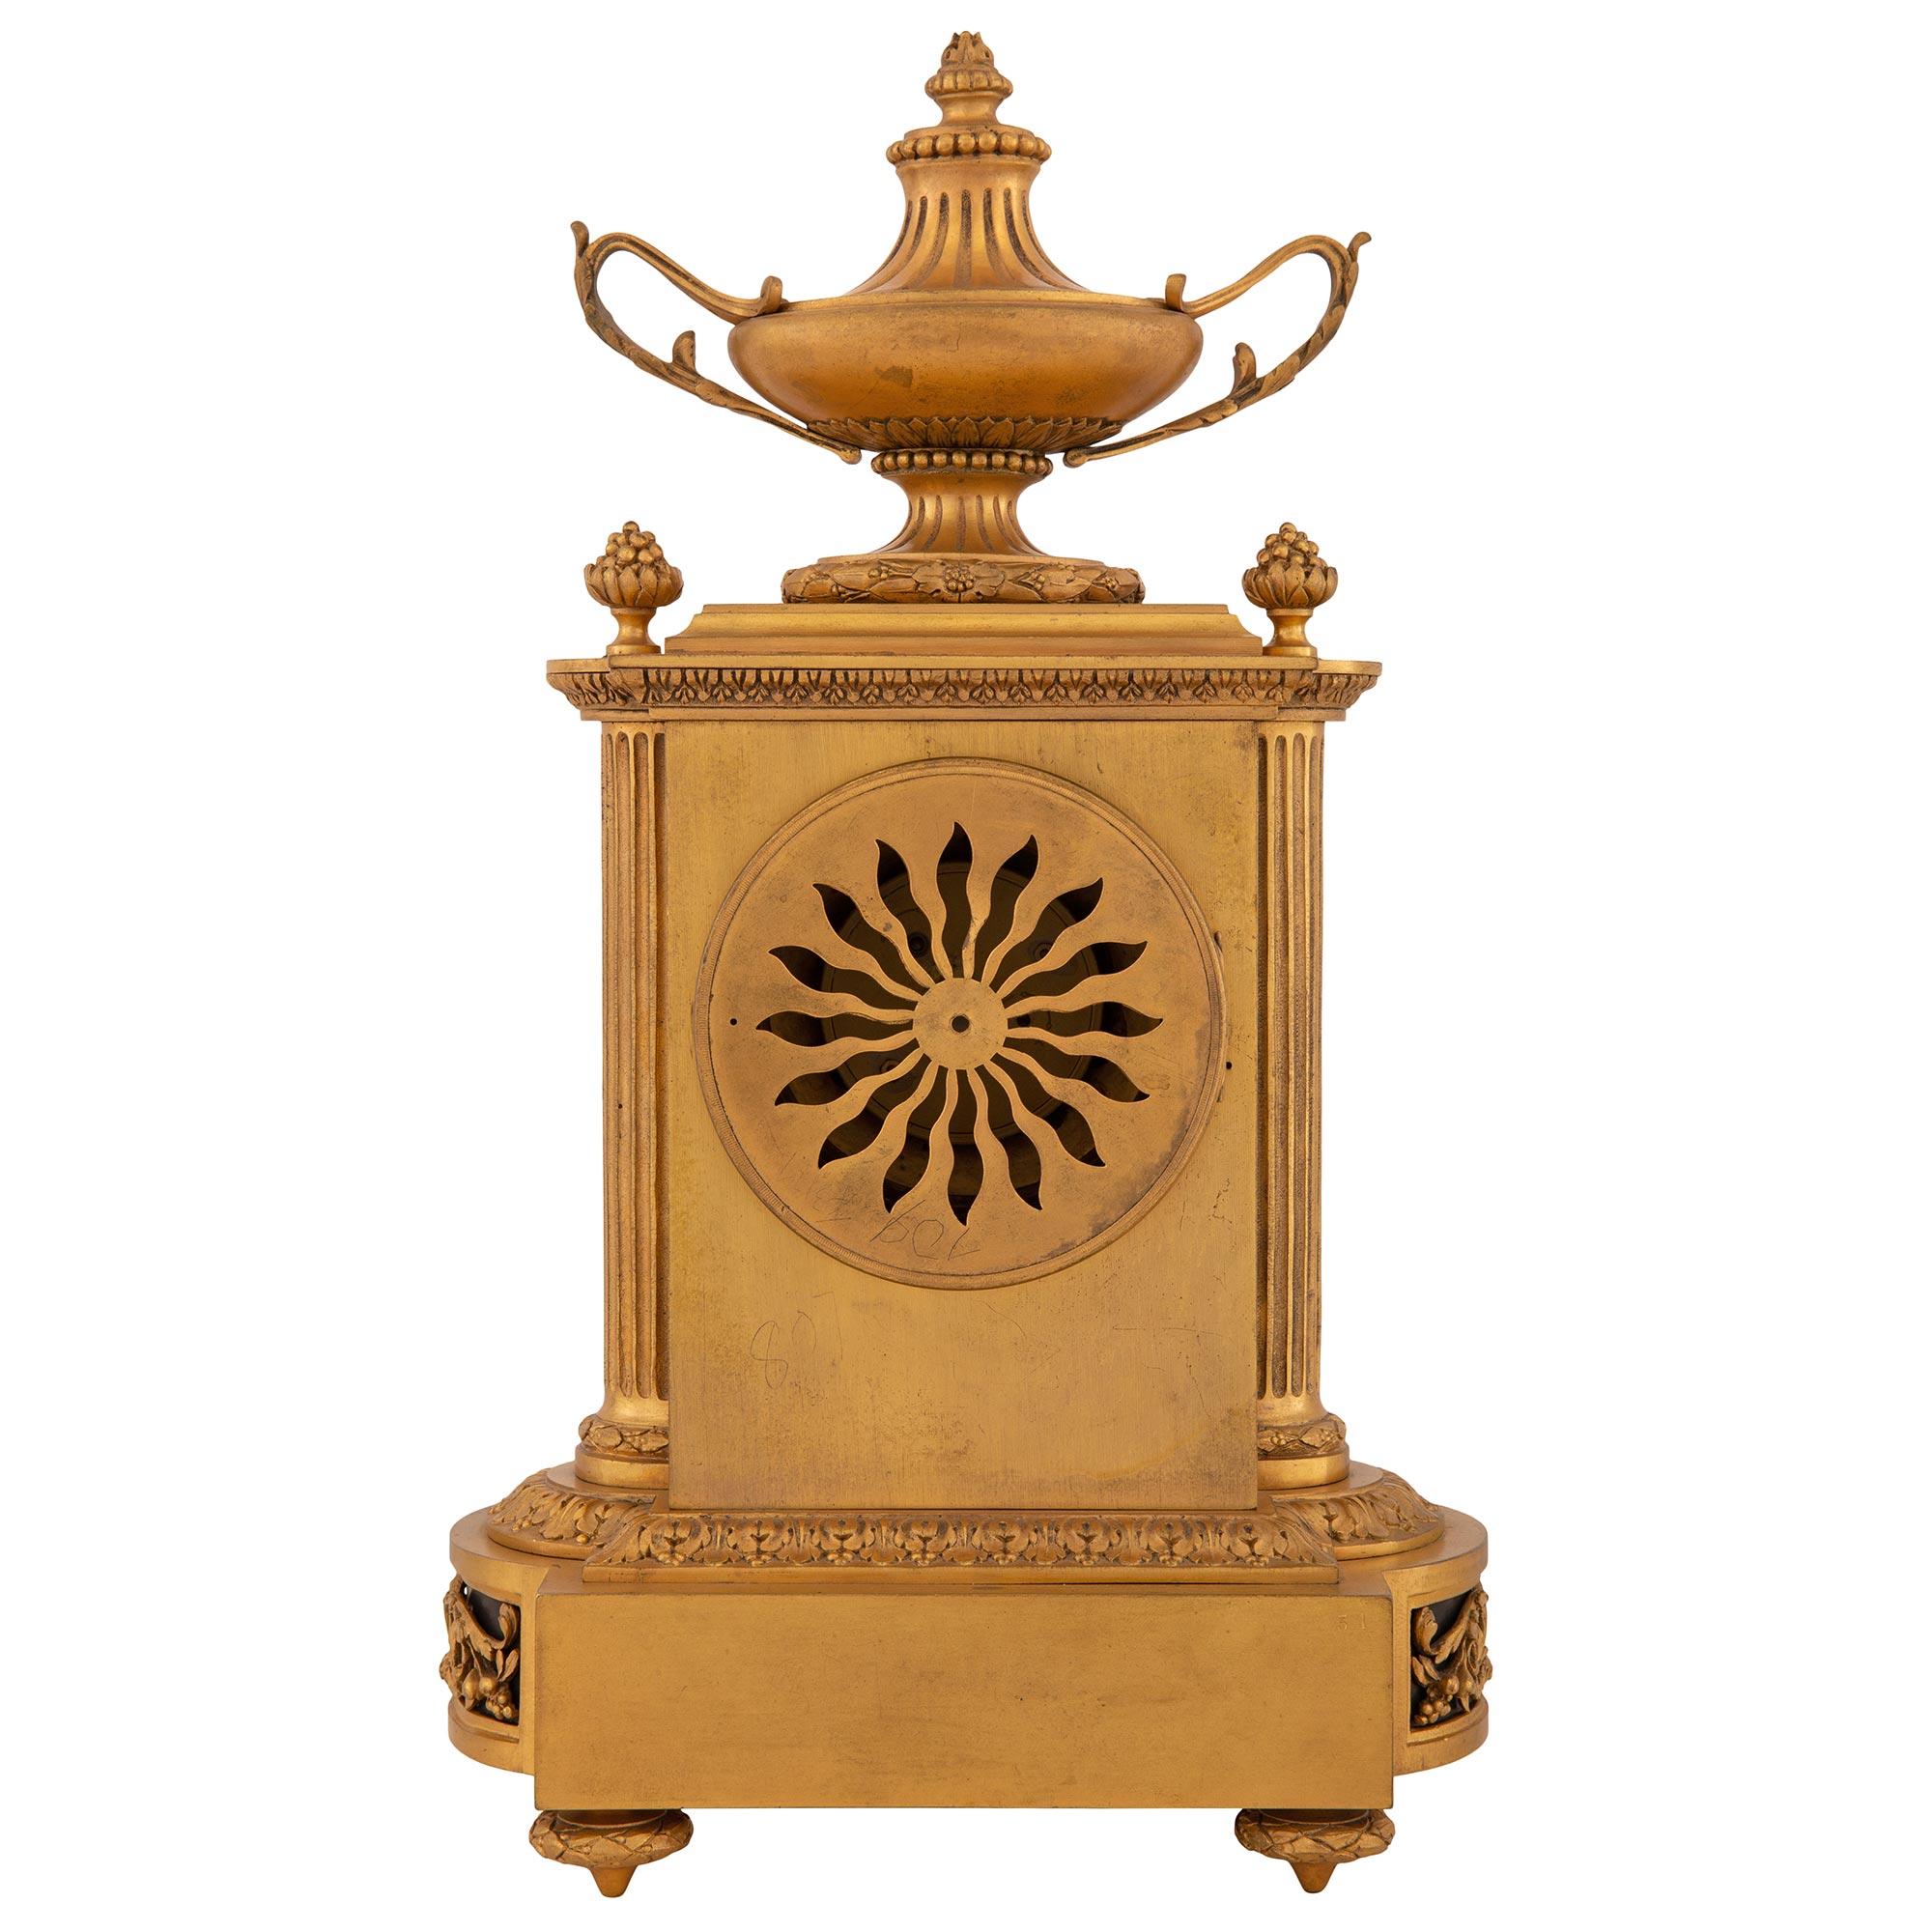 French 19th Century Louis XVI Style Ormolu Clock Signed 'Raingo Freres, Paris In Good Condition For Sale In West Palm Beach, FL